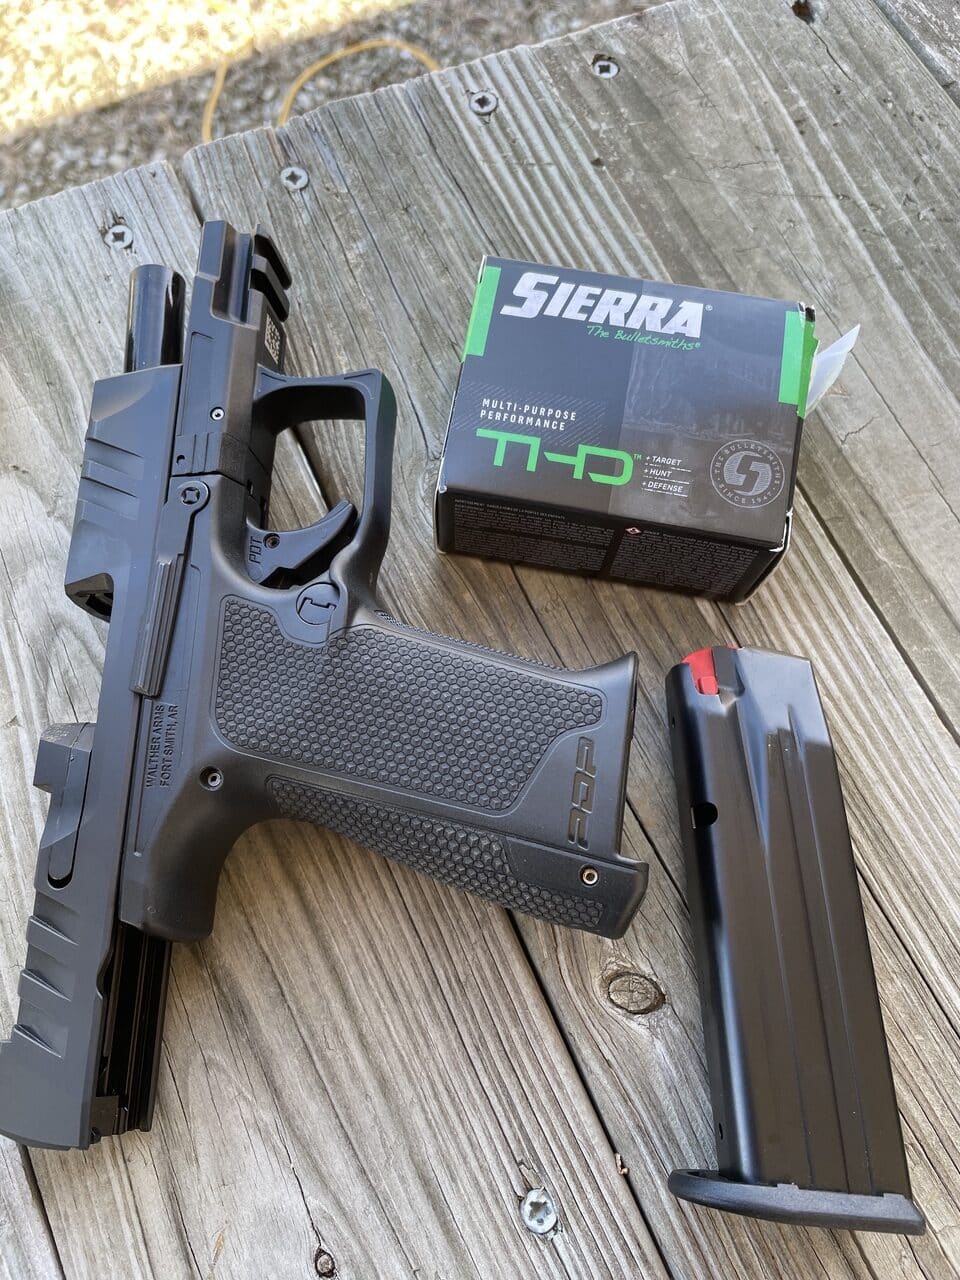 Walther PPD F-series and Sierra THD